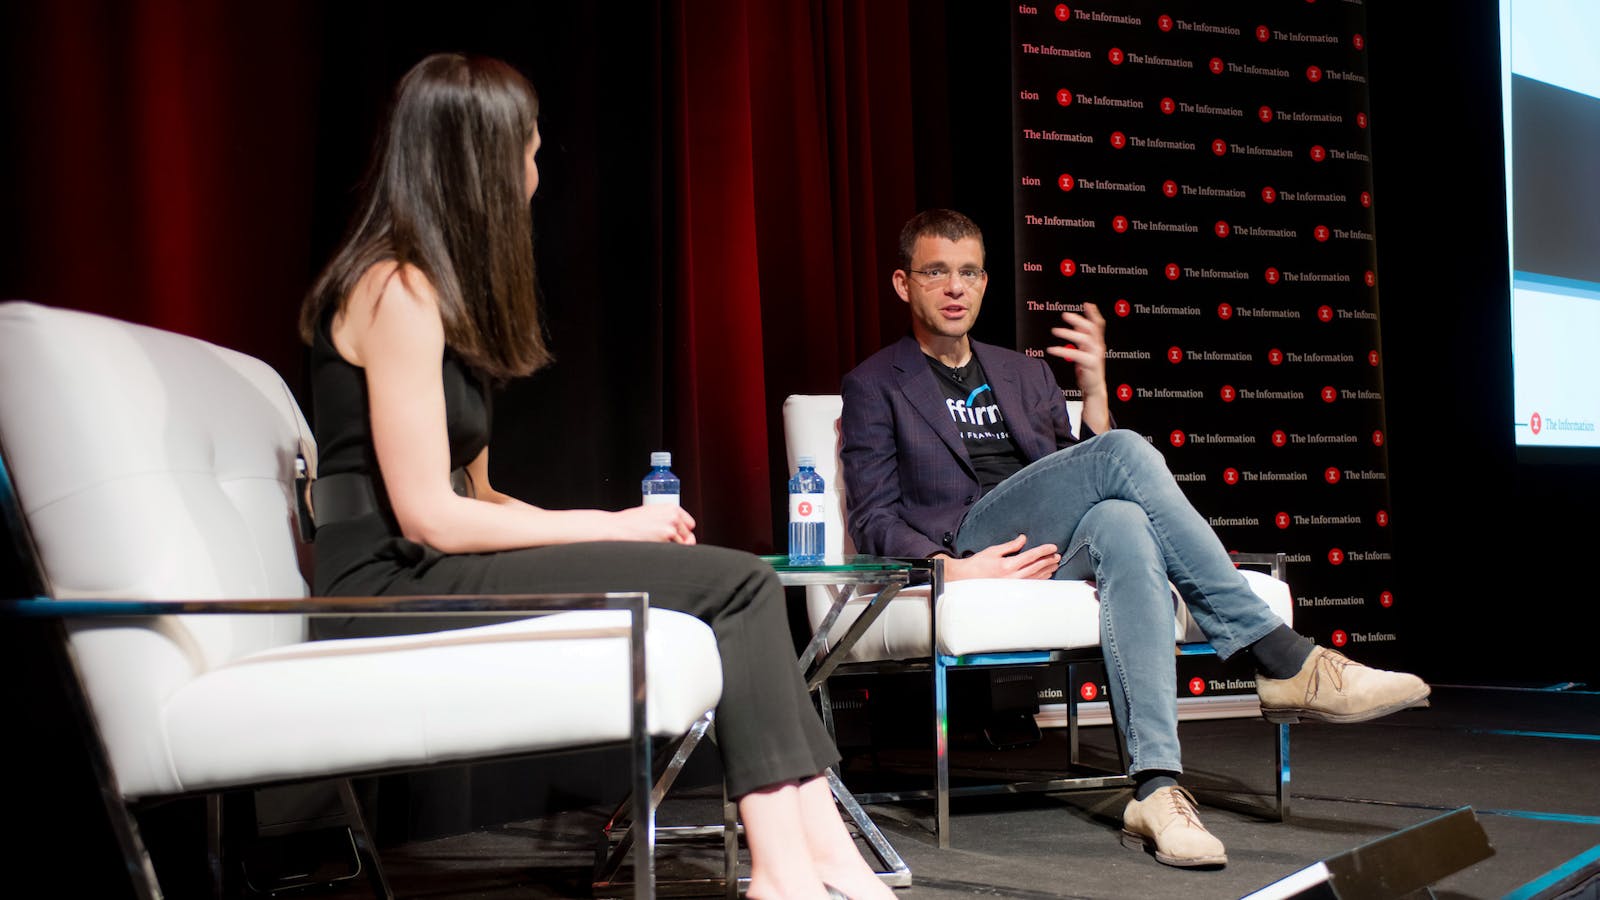 Affirm CEO Max Levchin. Photo by Angie Silvy